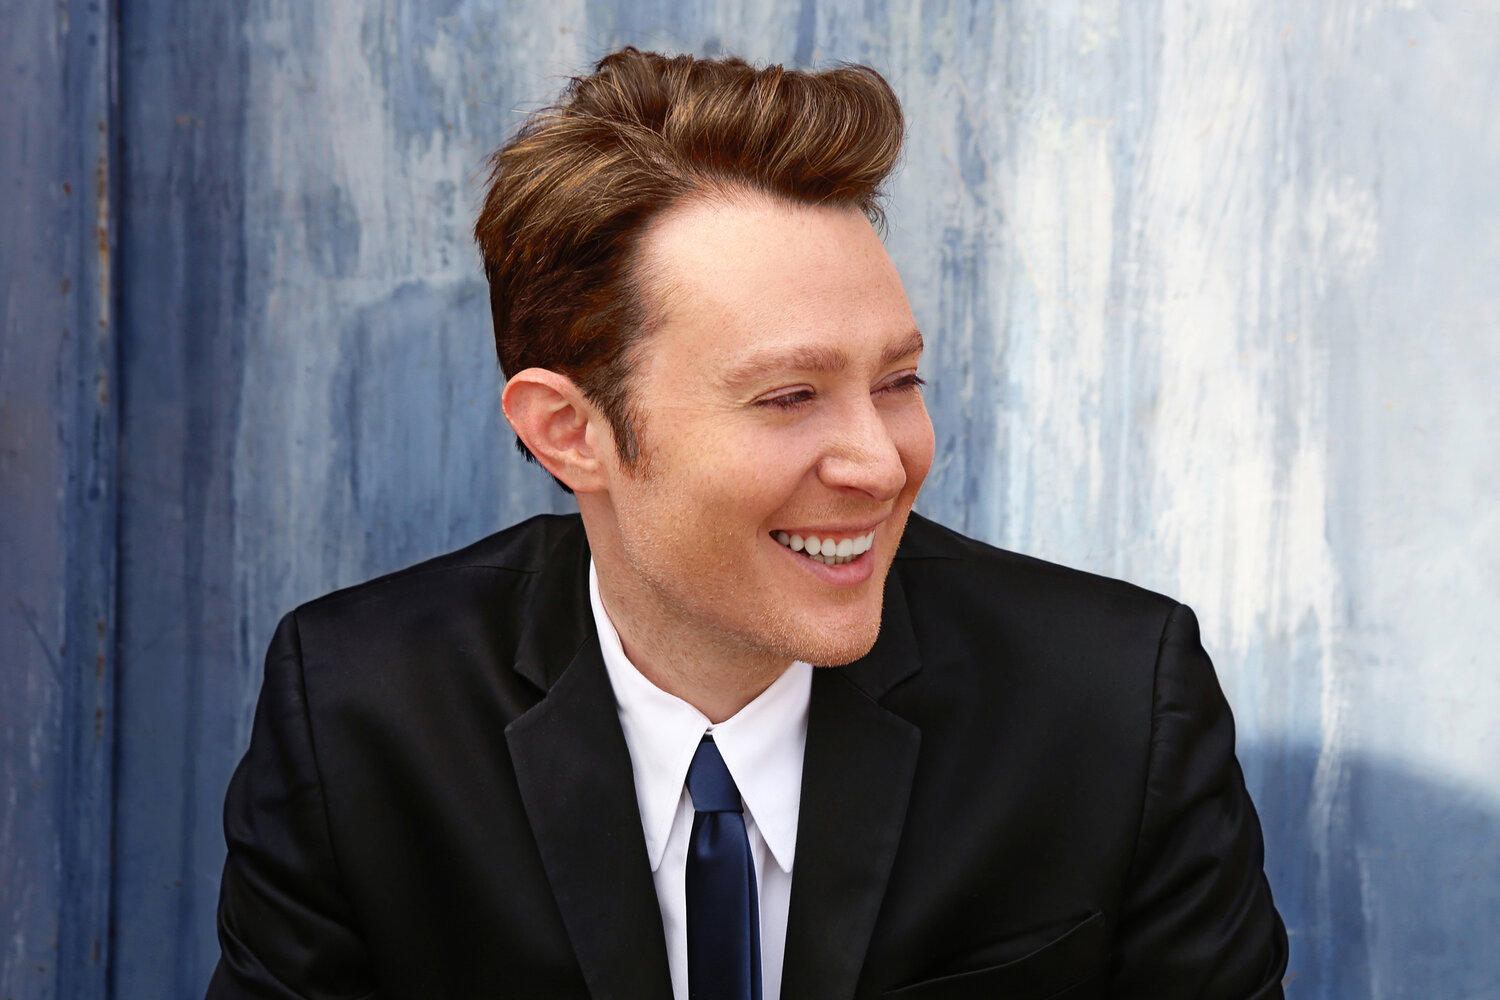 North Carolina native and runner up of American Idol season two, Clay Aiken made history as the first Idol alum to have his debut single reach No. 1 on Billboard’s Hot 100 chart, and first to earn a platinum-certified single and triple platinum album. He also co-headlined with Kelly Clarkson on their 2003 Independent Tour.